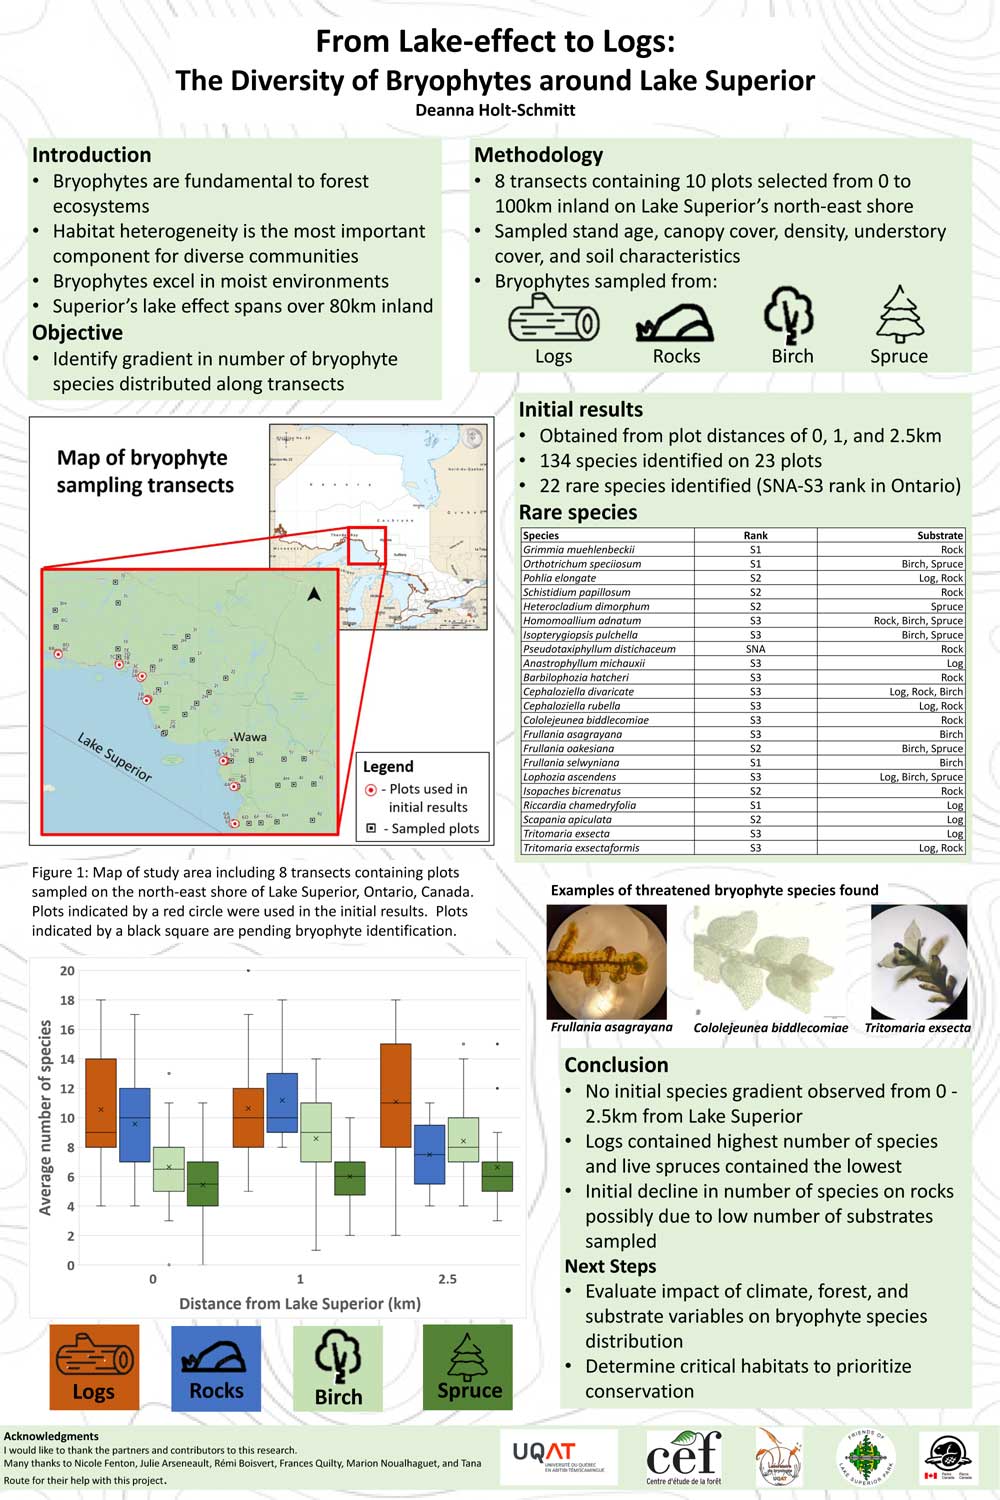 From lake-effect to logs: The diversity of bryophytes around Lake Superior